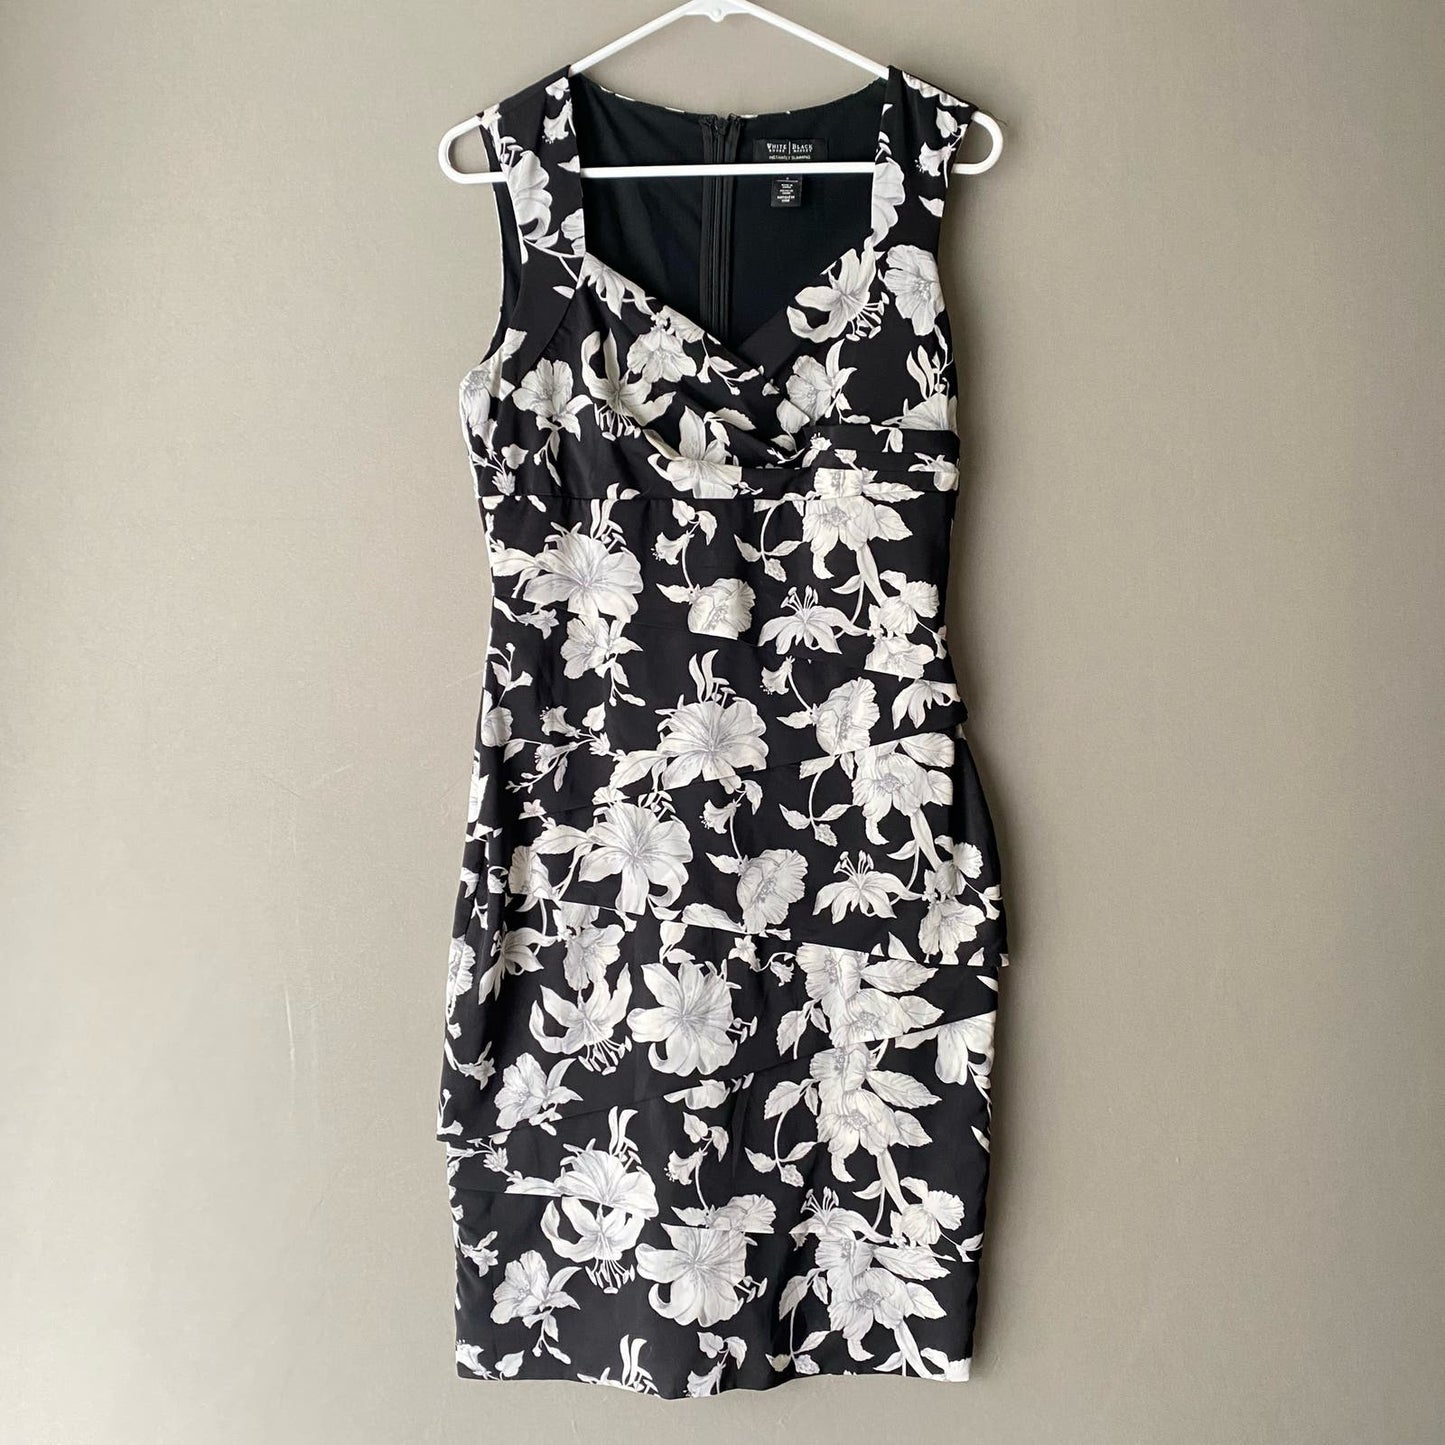 WHBM instantly slimming sz 6 floral sweetheart spring floral sheath dress